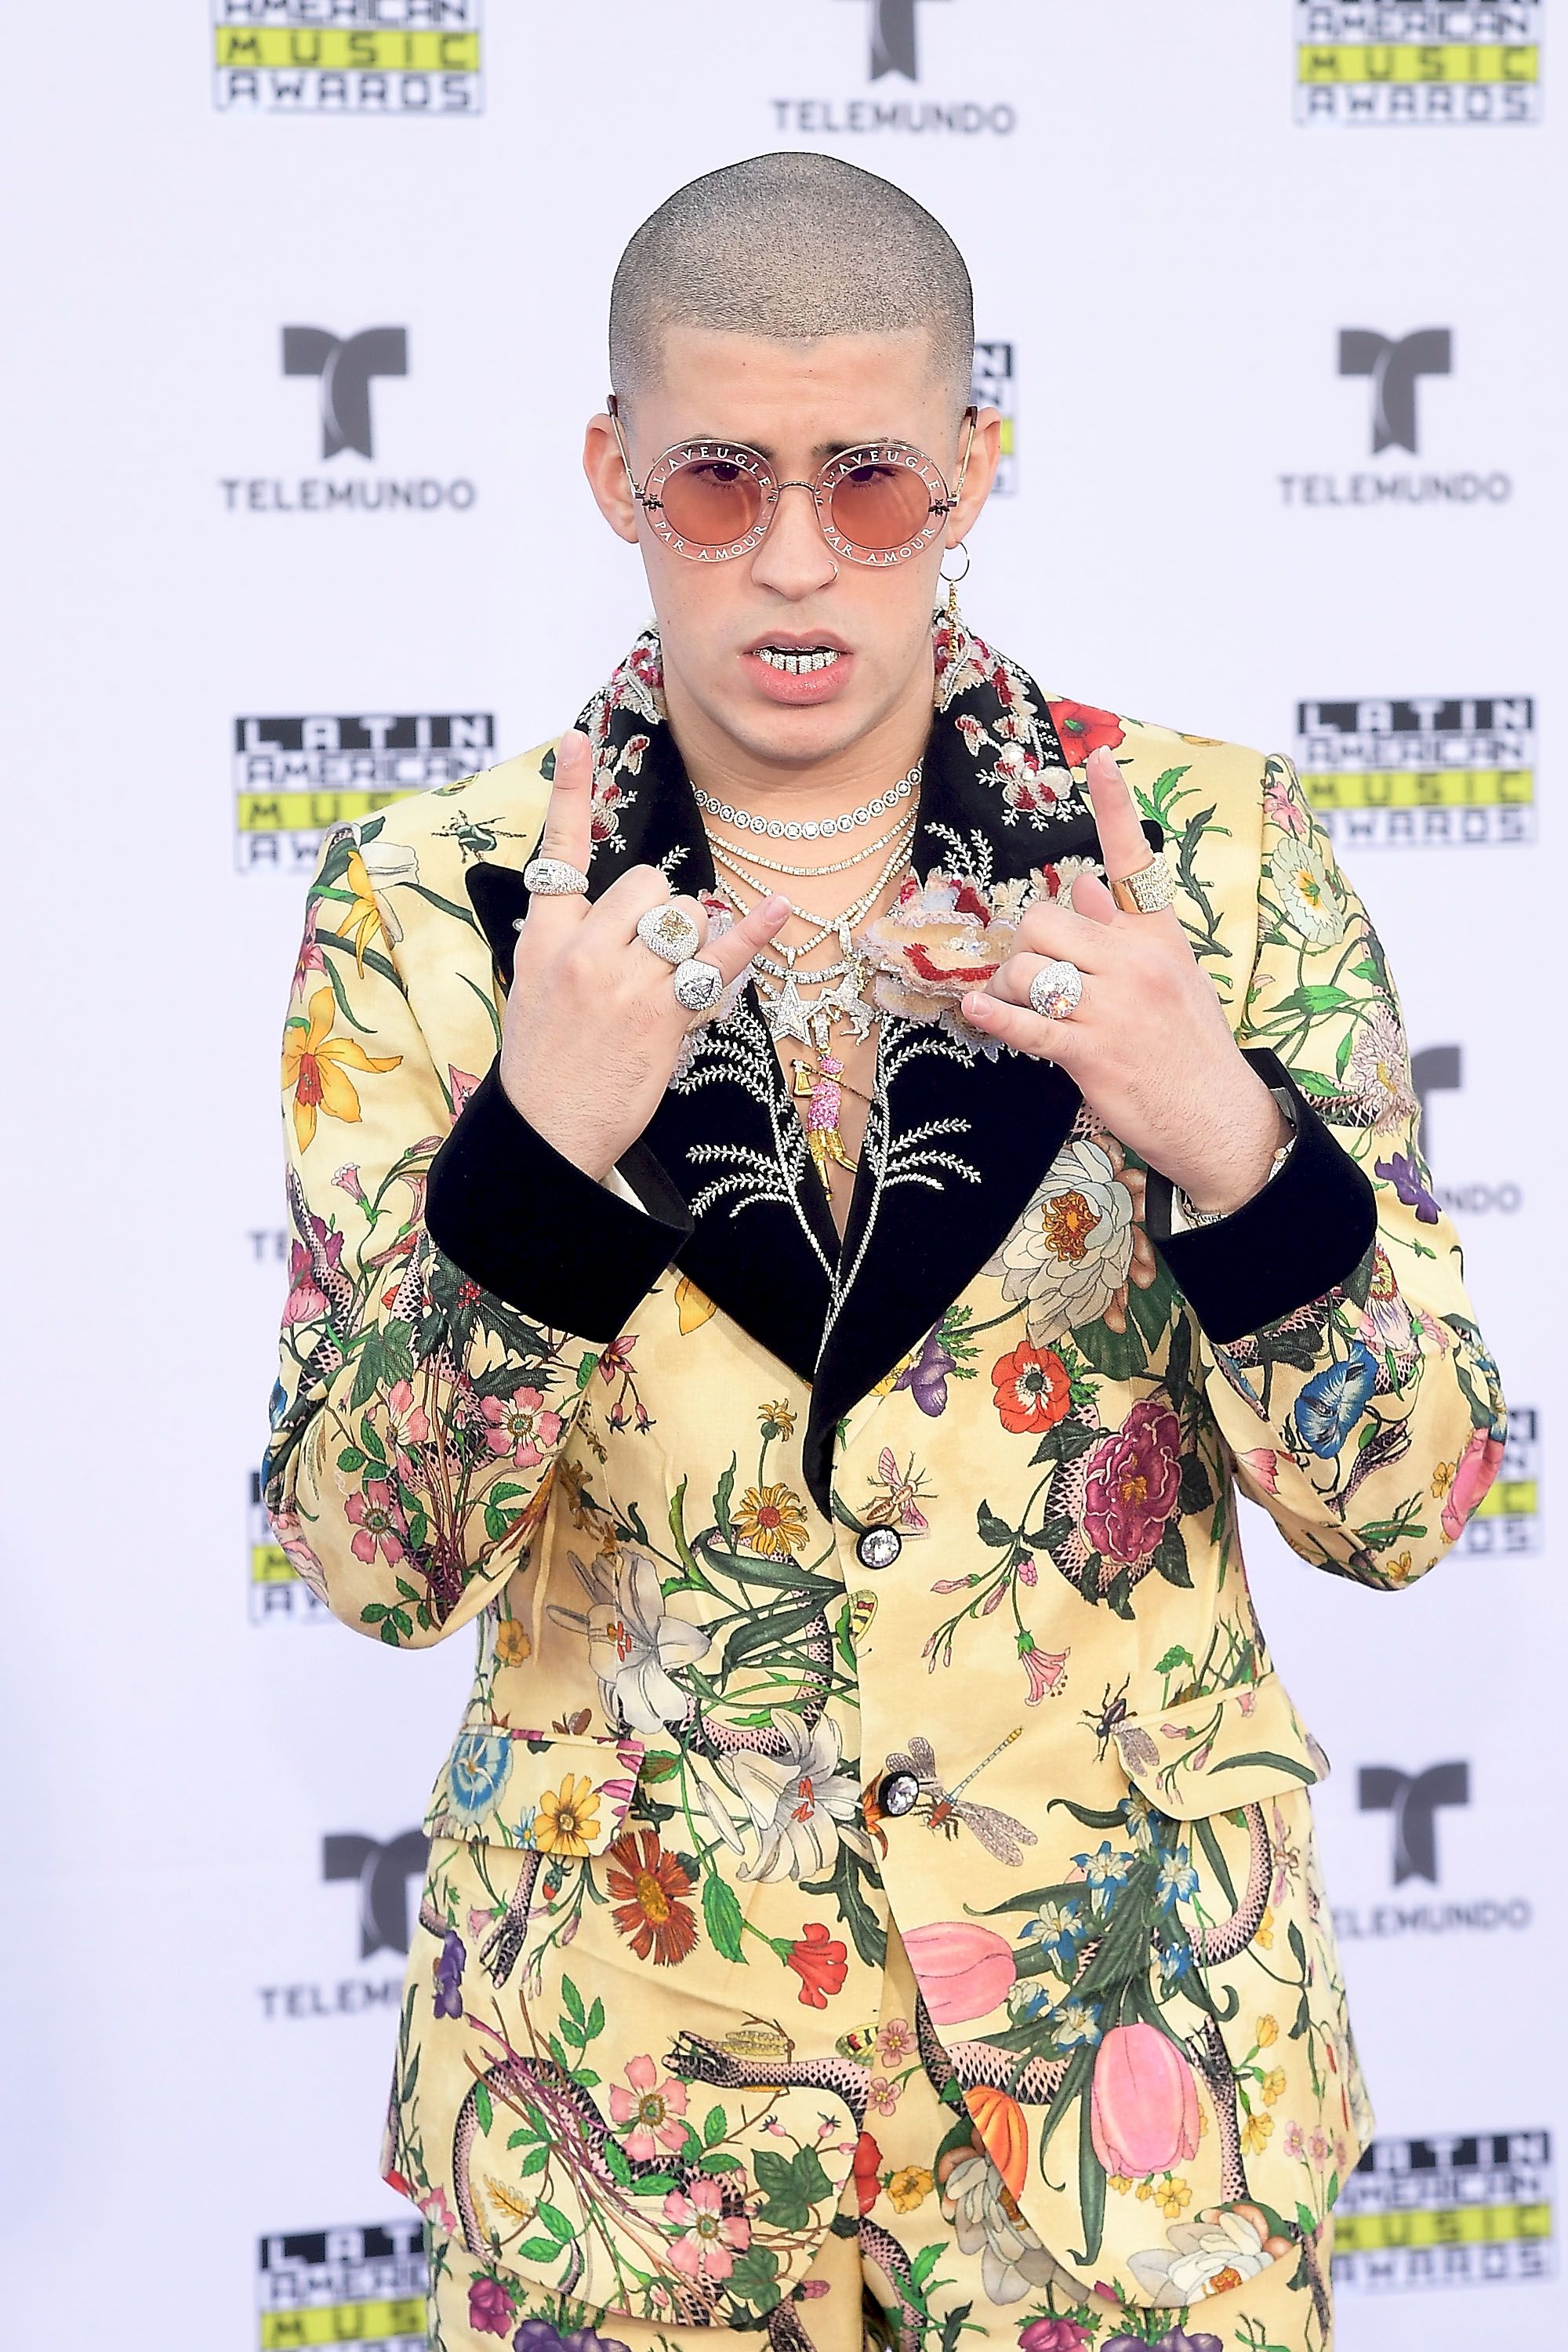 25 Of Bad Bunny's Most Iconic Fashion Looks